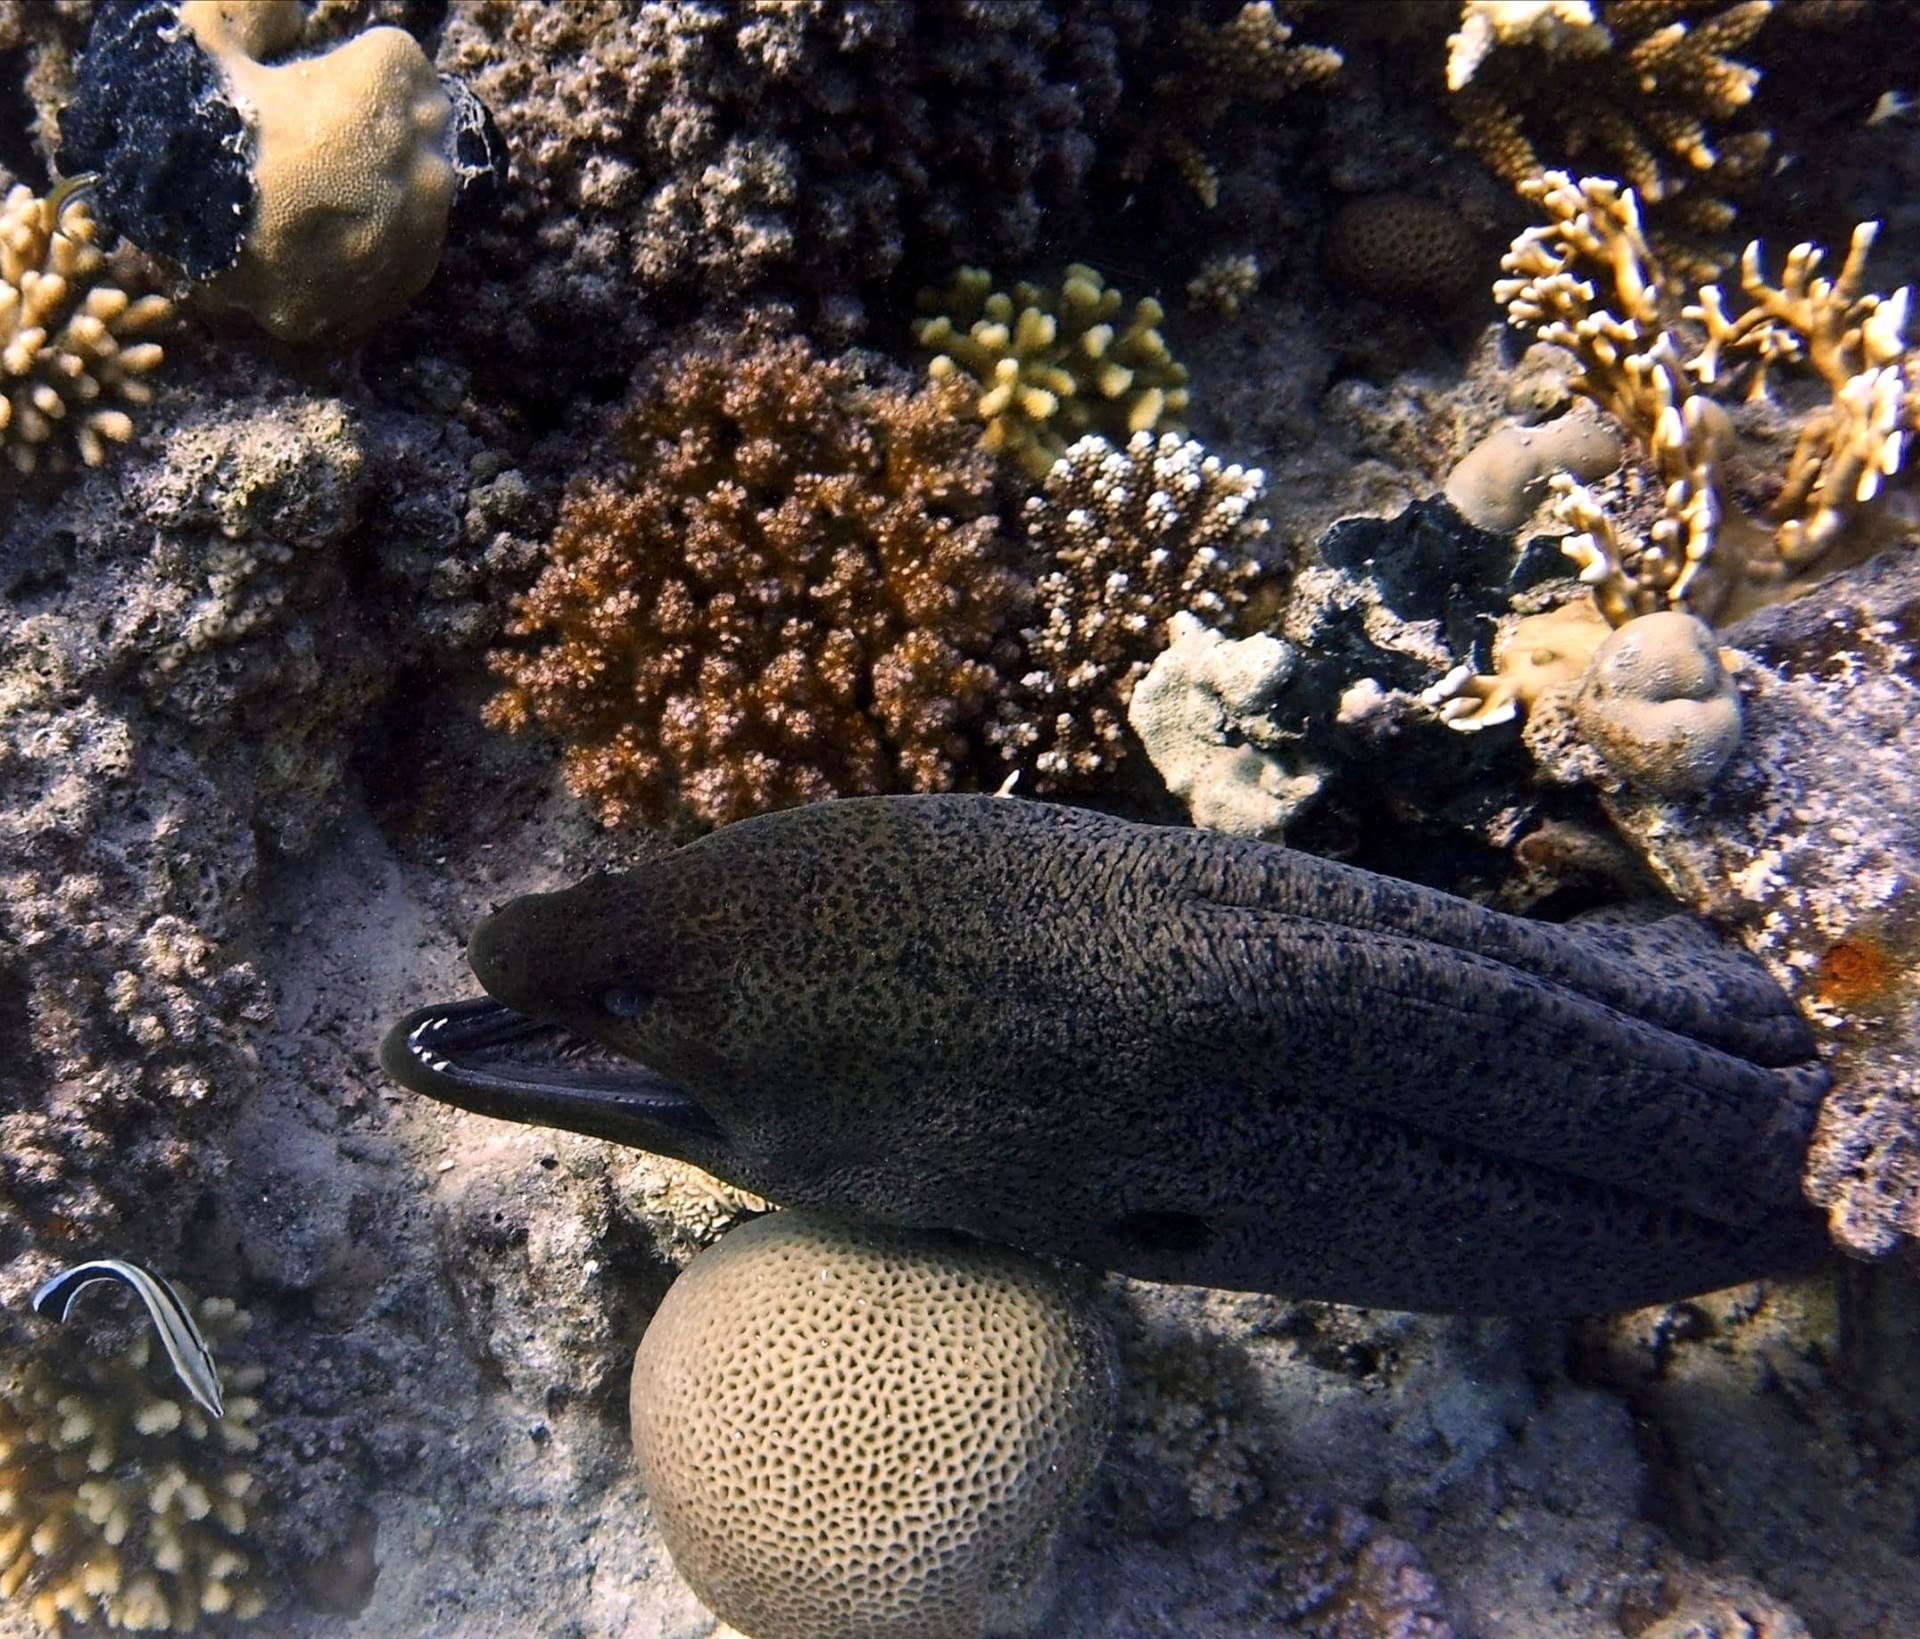 A Giant moray eel and cleaner fish 